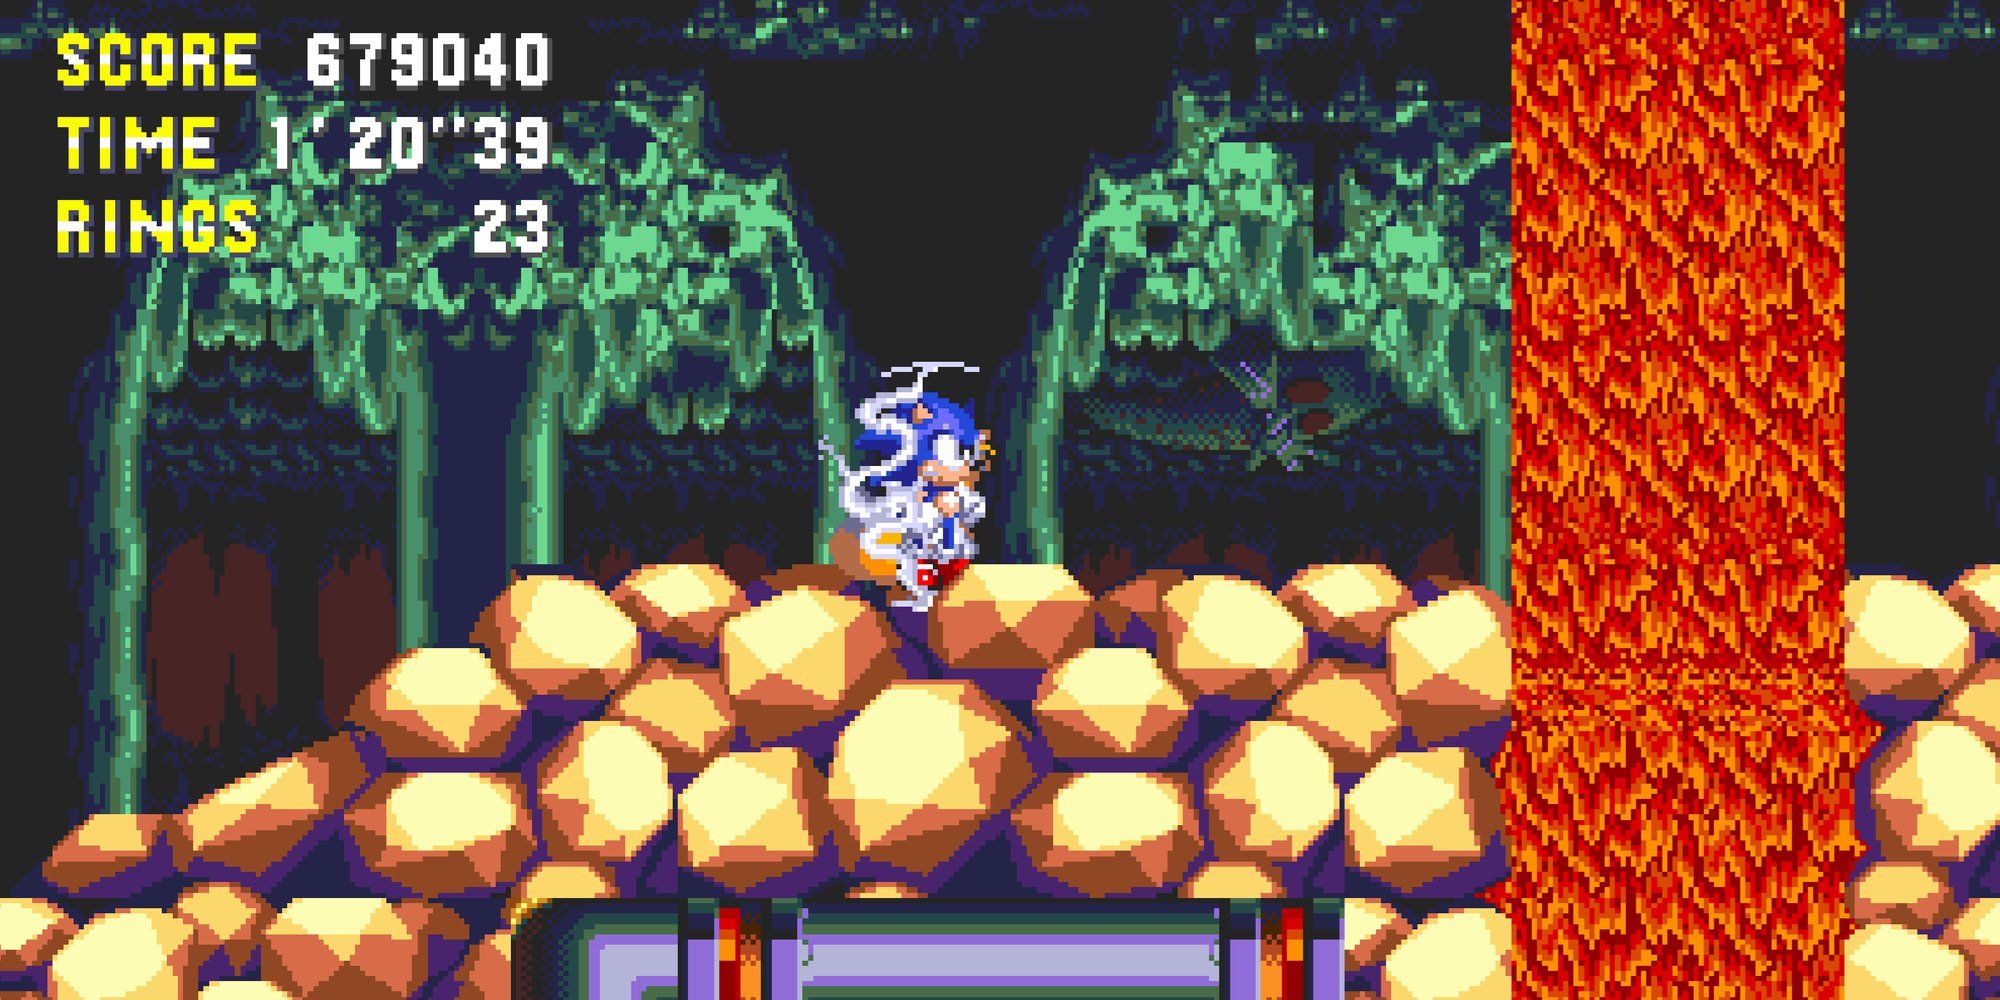 Sonic runs past flowing lava in Lava Reef Zone in Sonic 3 & Knuckles